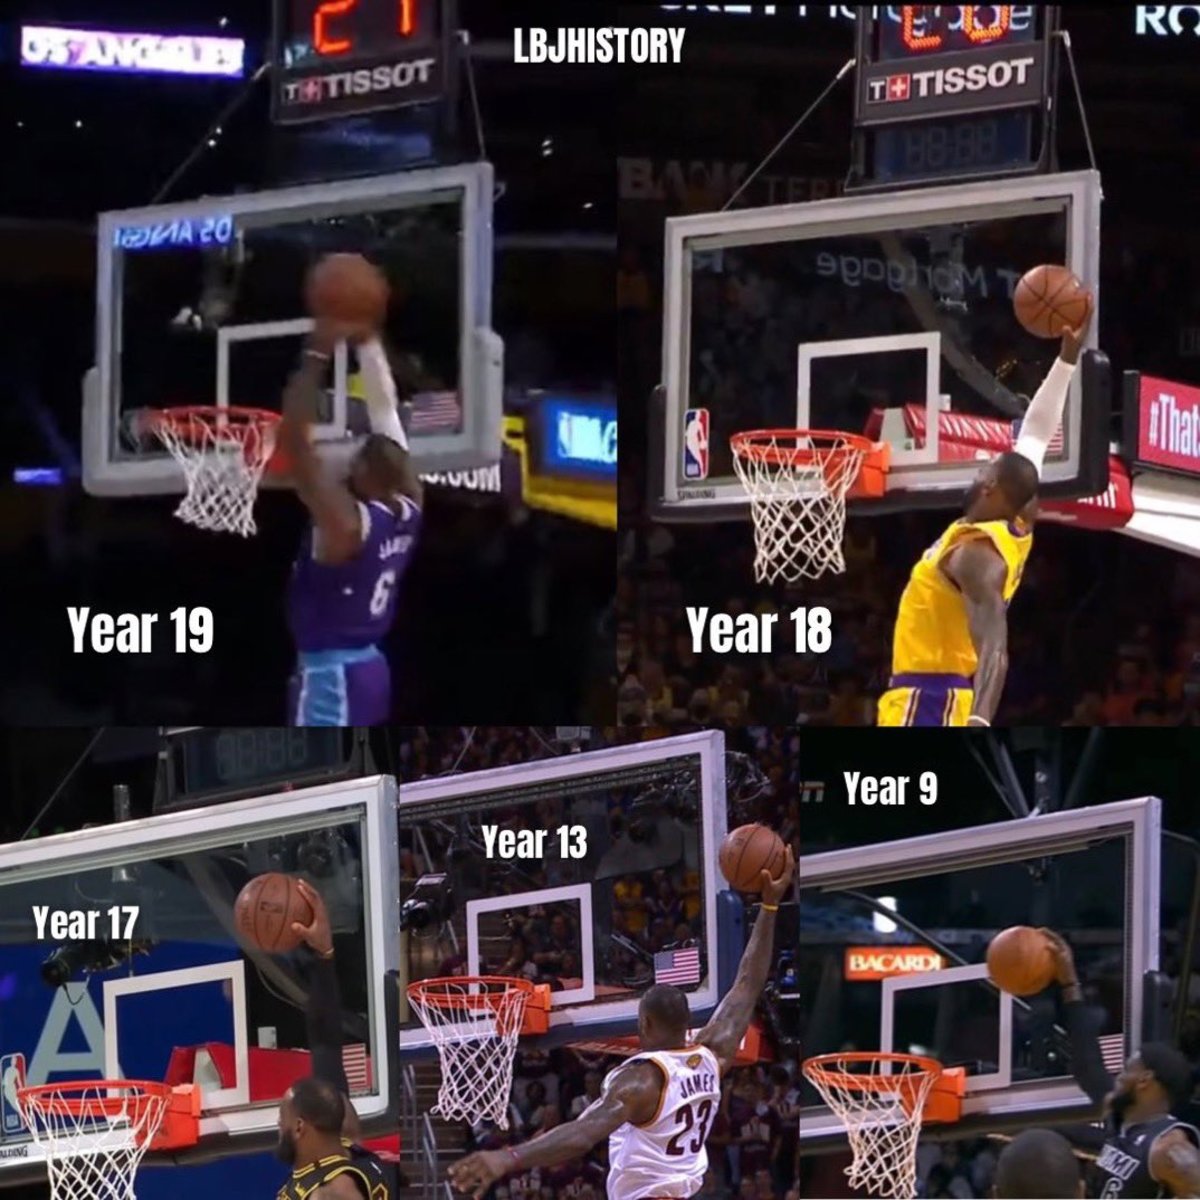 LeBron James' Dunks From Year 9 To Year 19 Show Just How Incredible His Longevity Is: “Appreciate Him While You Can Cause This Is Not Normal.”